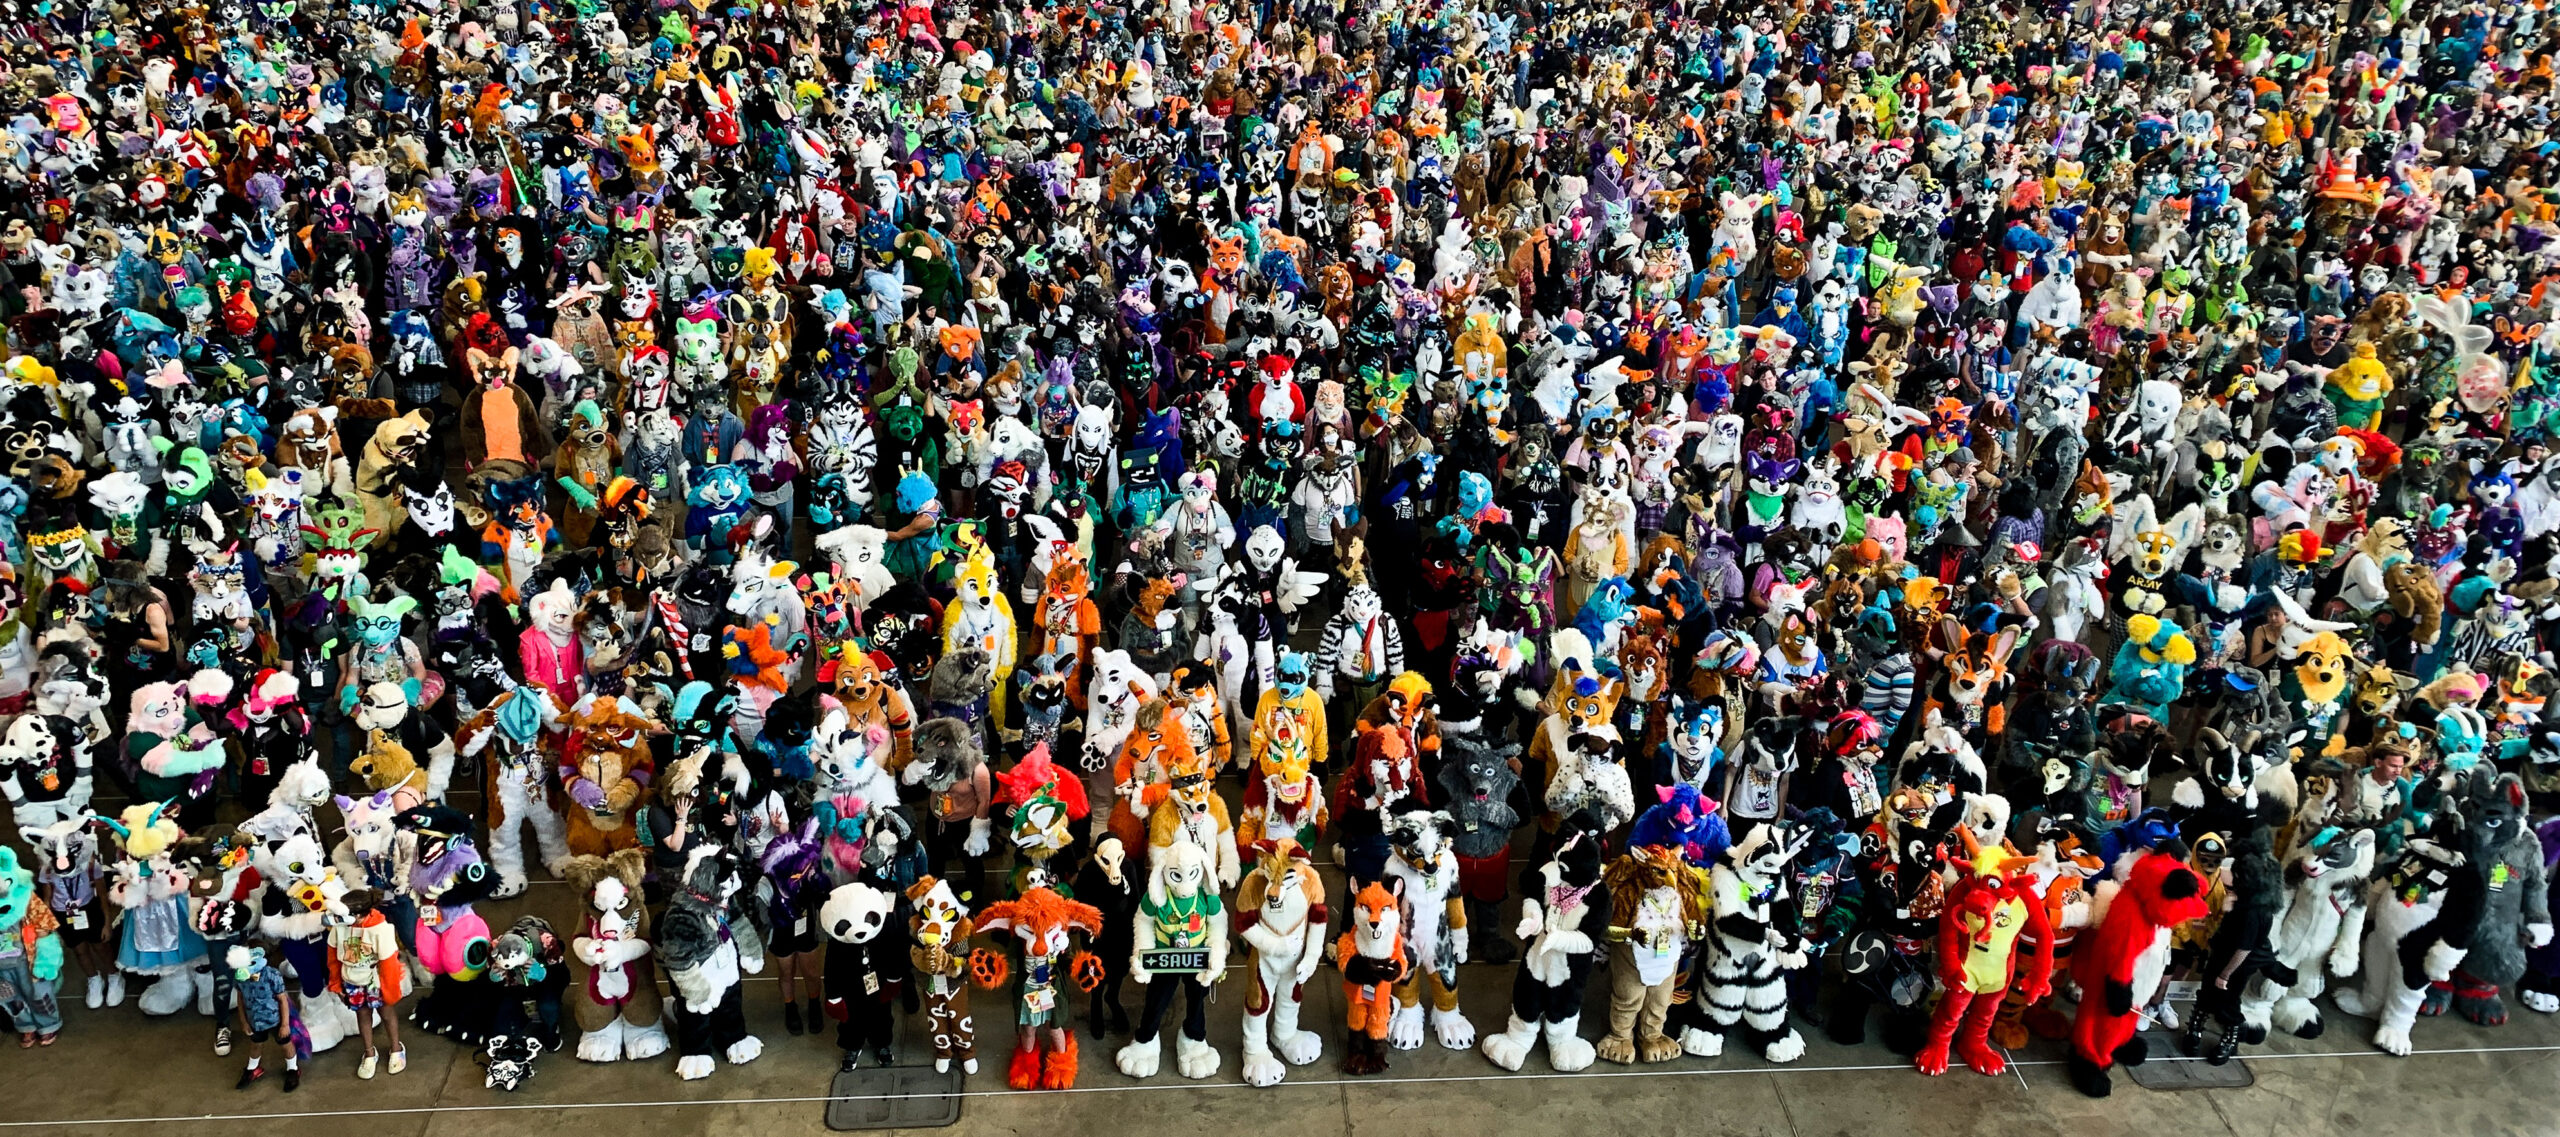 A large group of Furries, people dressed up in animal costumes